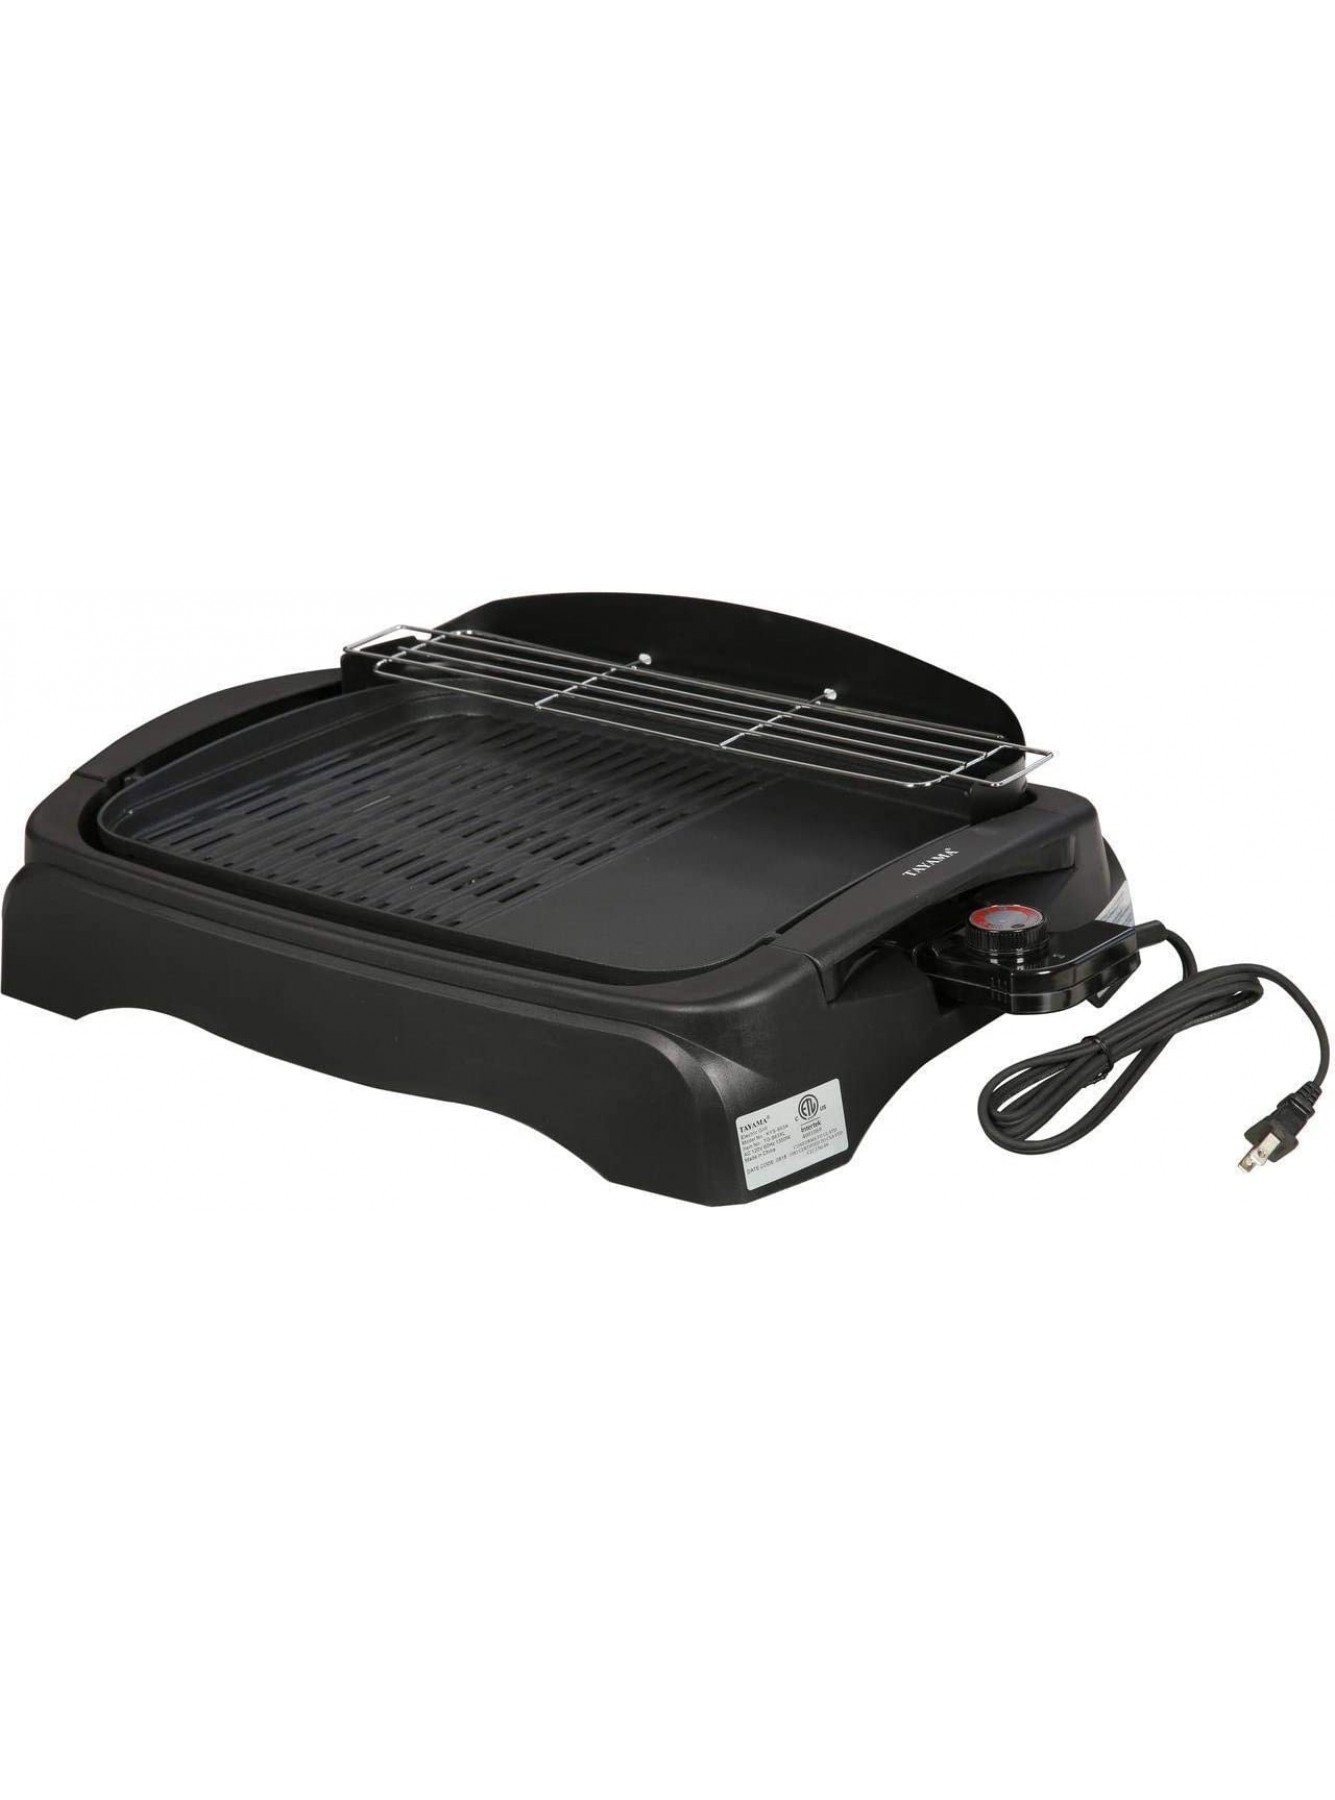 Tayama TG-863XL Non-Stick Electric Grill Ribbed and Solid Surface Large Black B07JPLL7JS